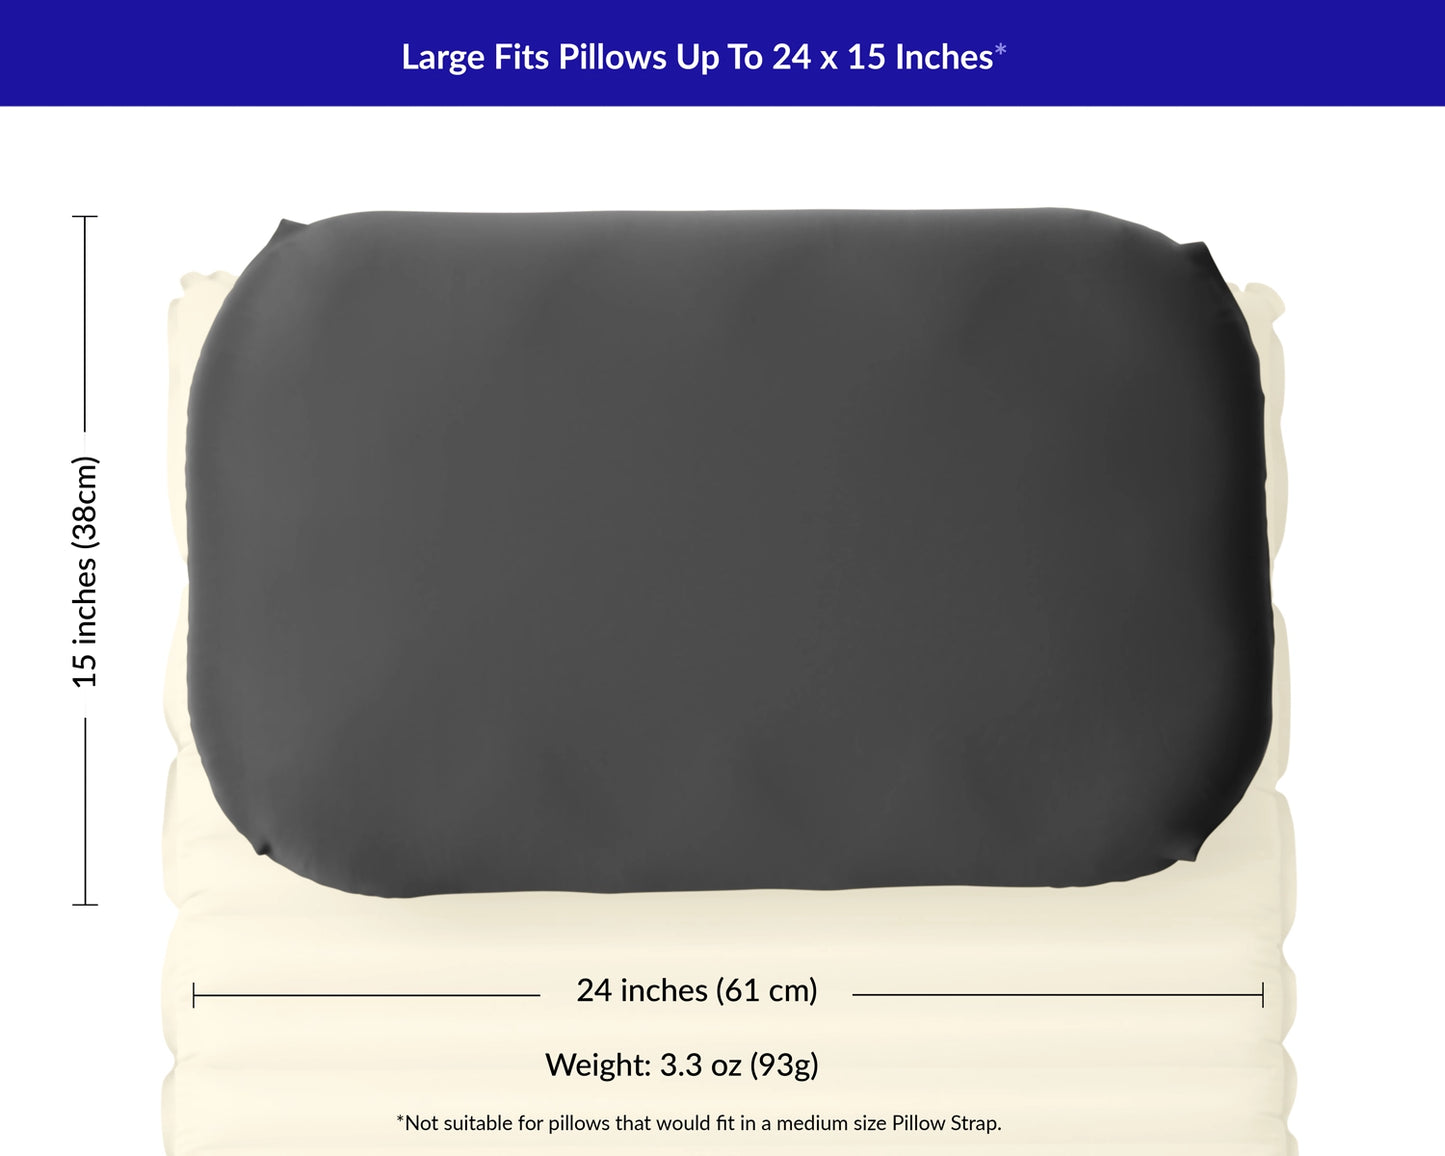 Measurements for maximum camp pillow size for small Pillow Strap is 24 by 15 inches.